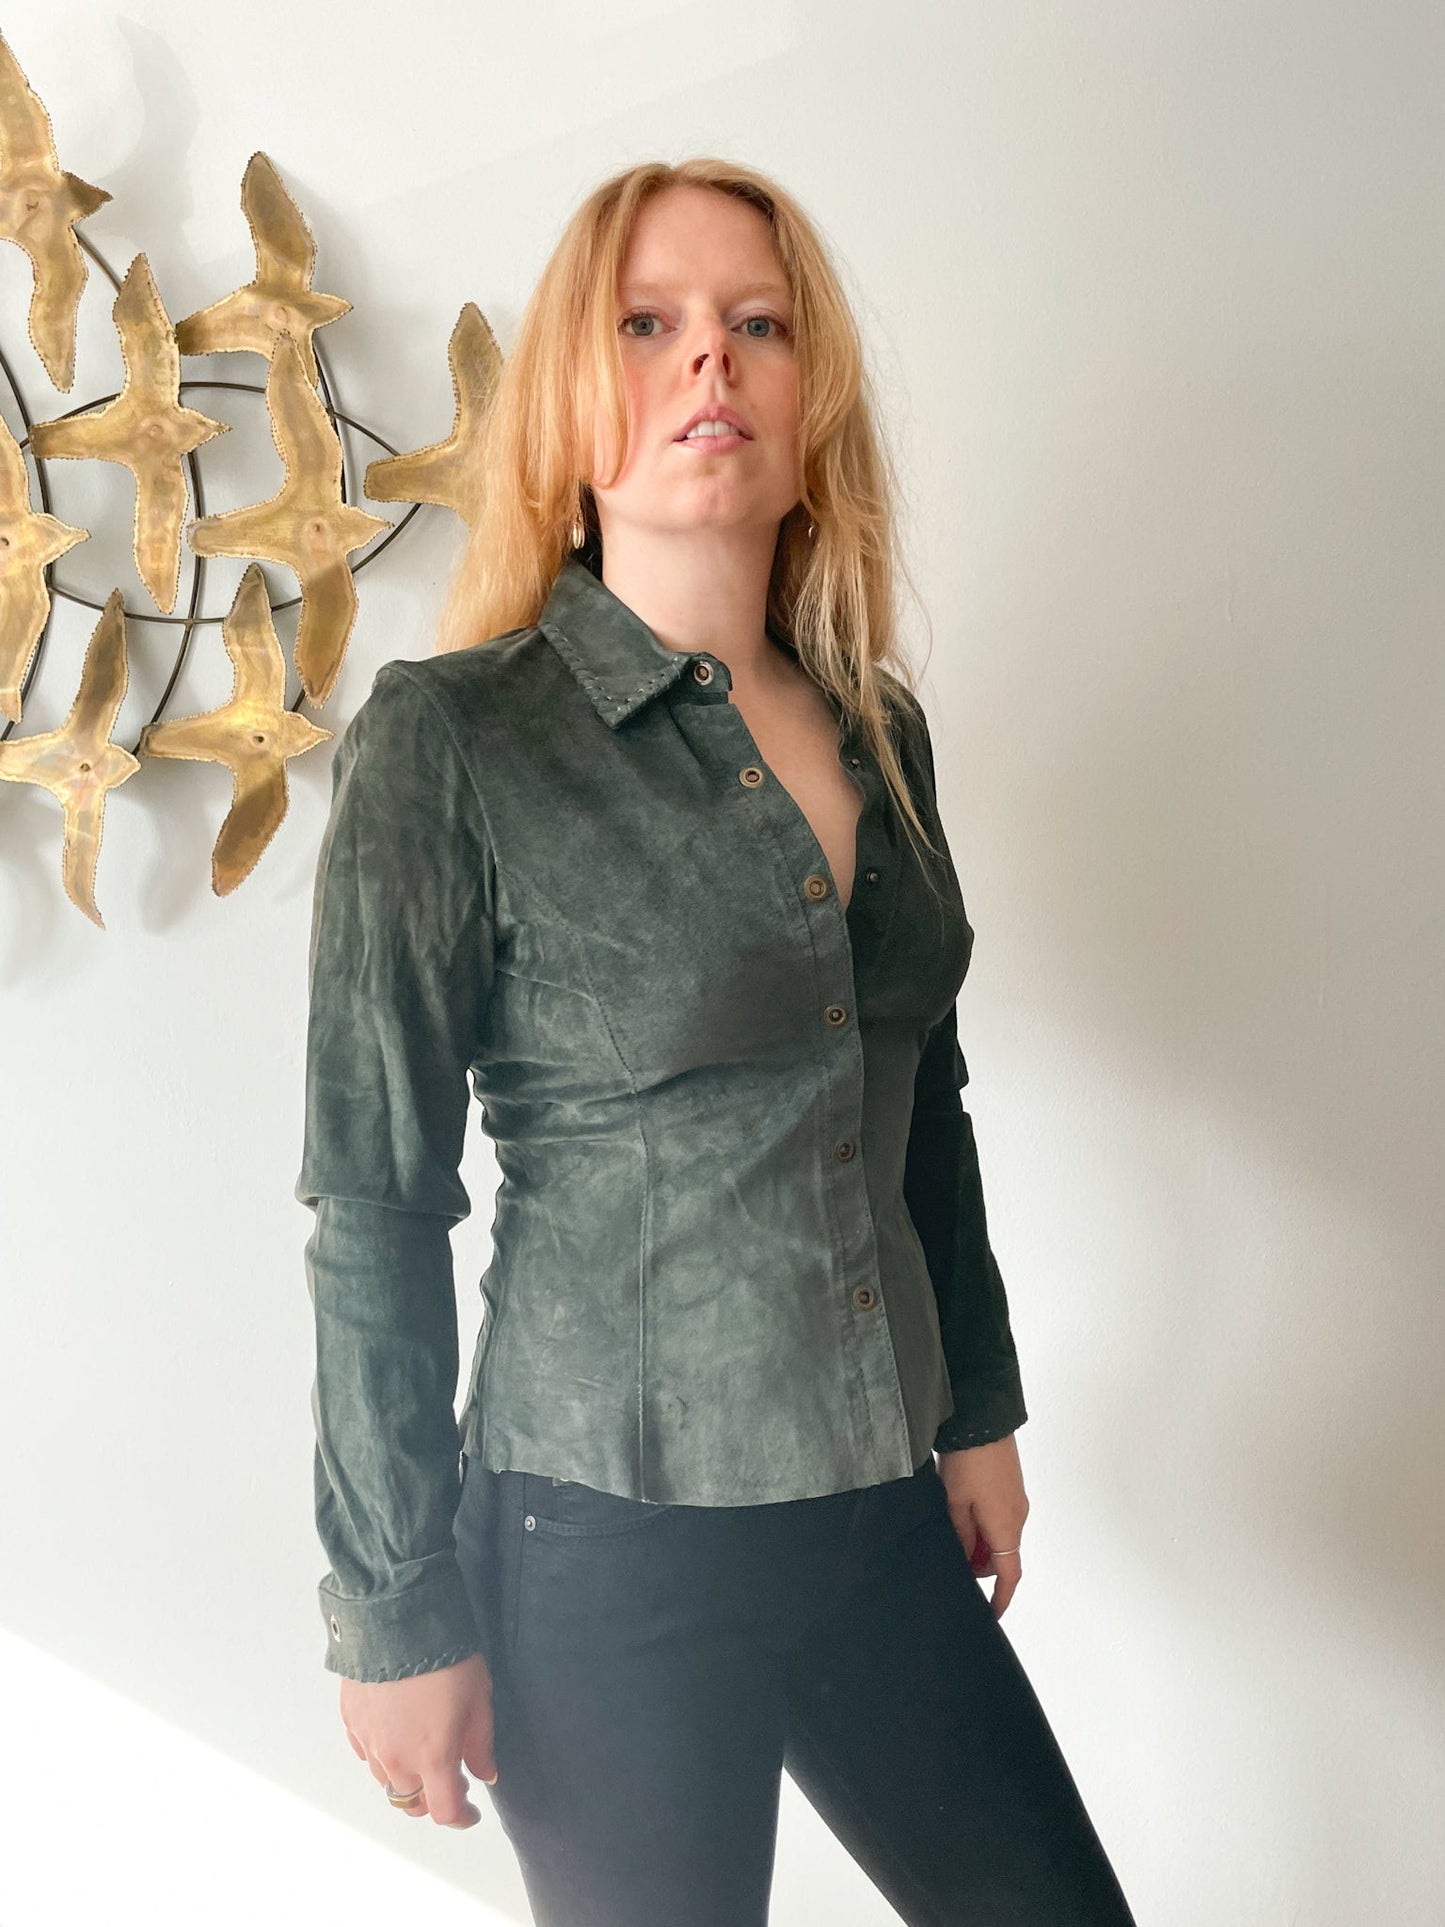 Cabi Olive Green Genuine Suede Leather Button Down Shirt NWT - XS